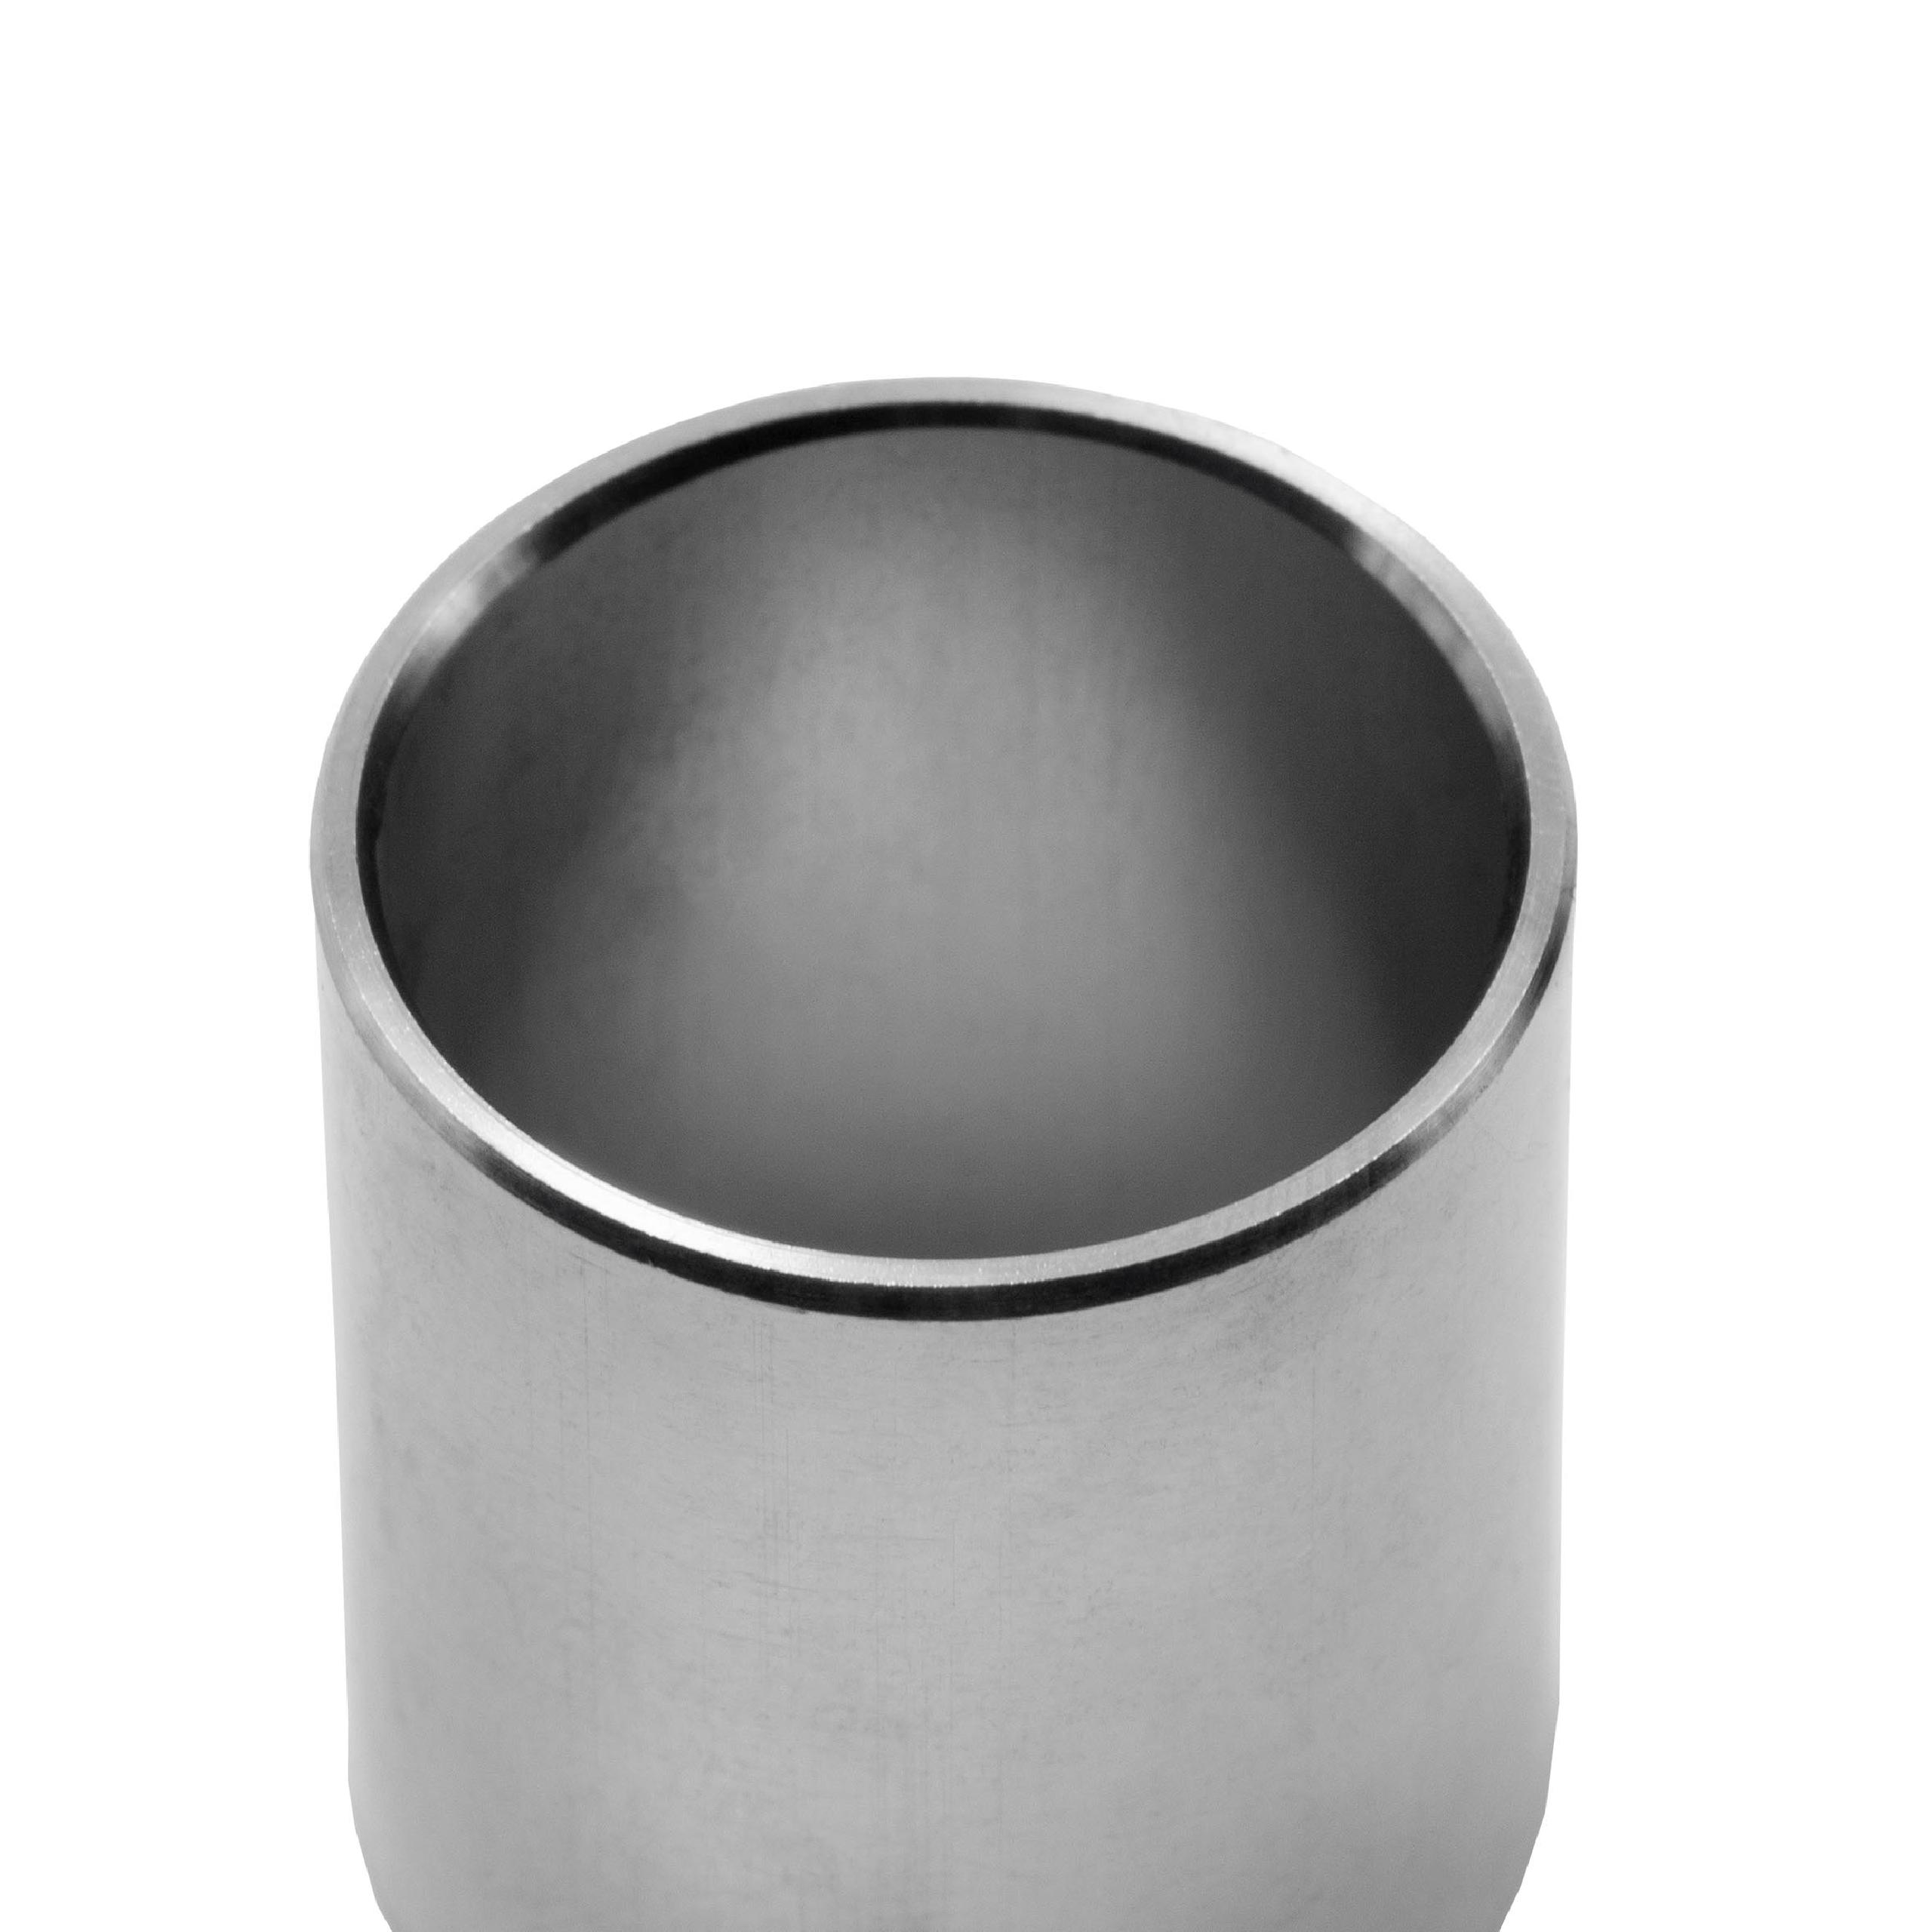 Guitar Slide 28mm stainless steel - Solid, Secure Hold